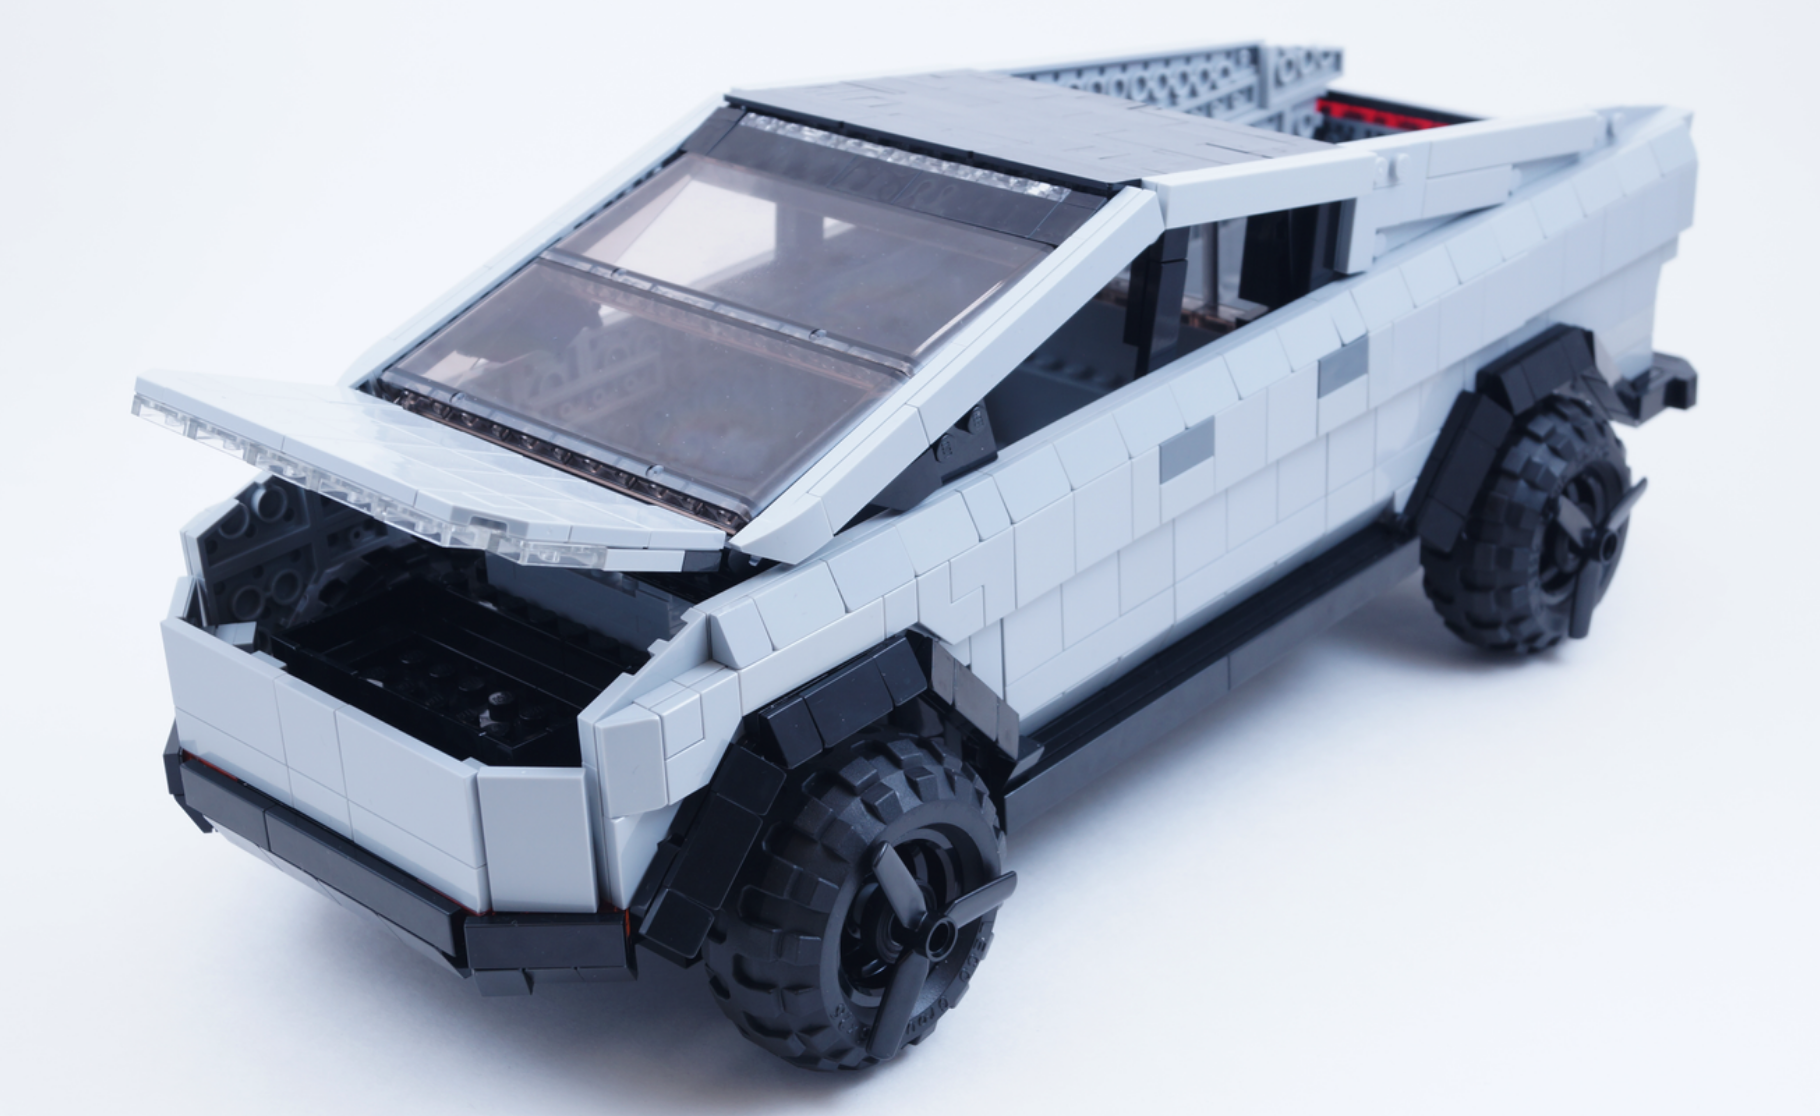 Lego Tesla Cybertruck Fan Model Gets 10,000 Votes to Become Real